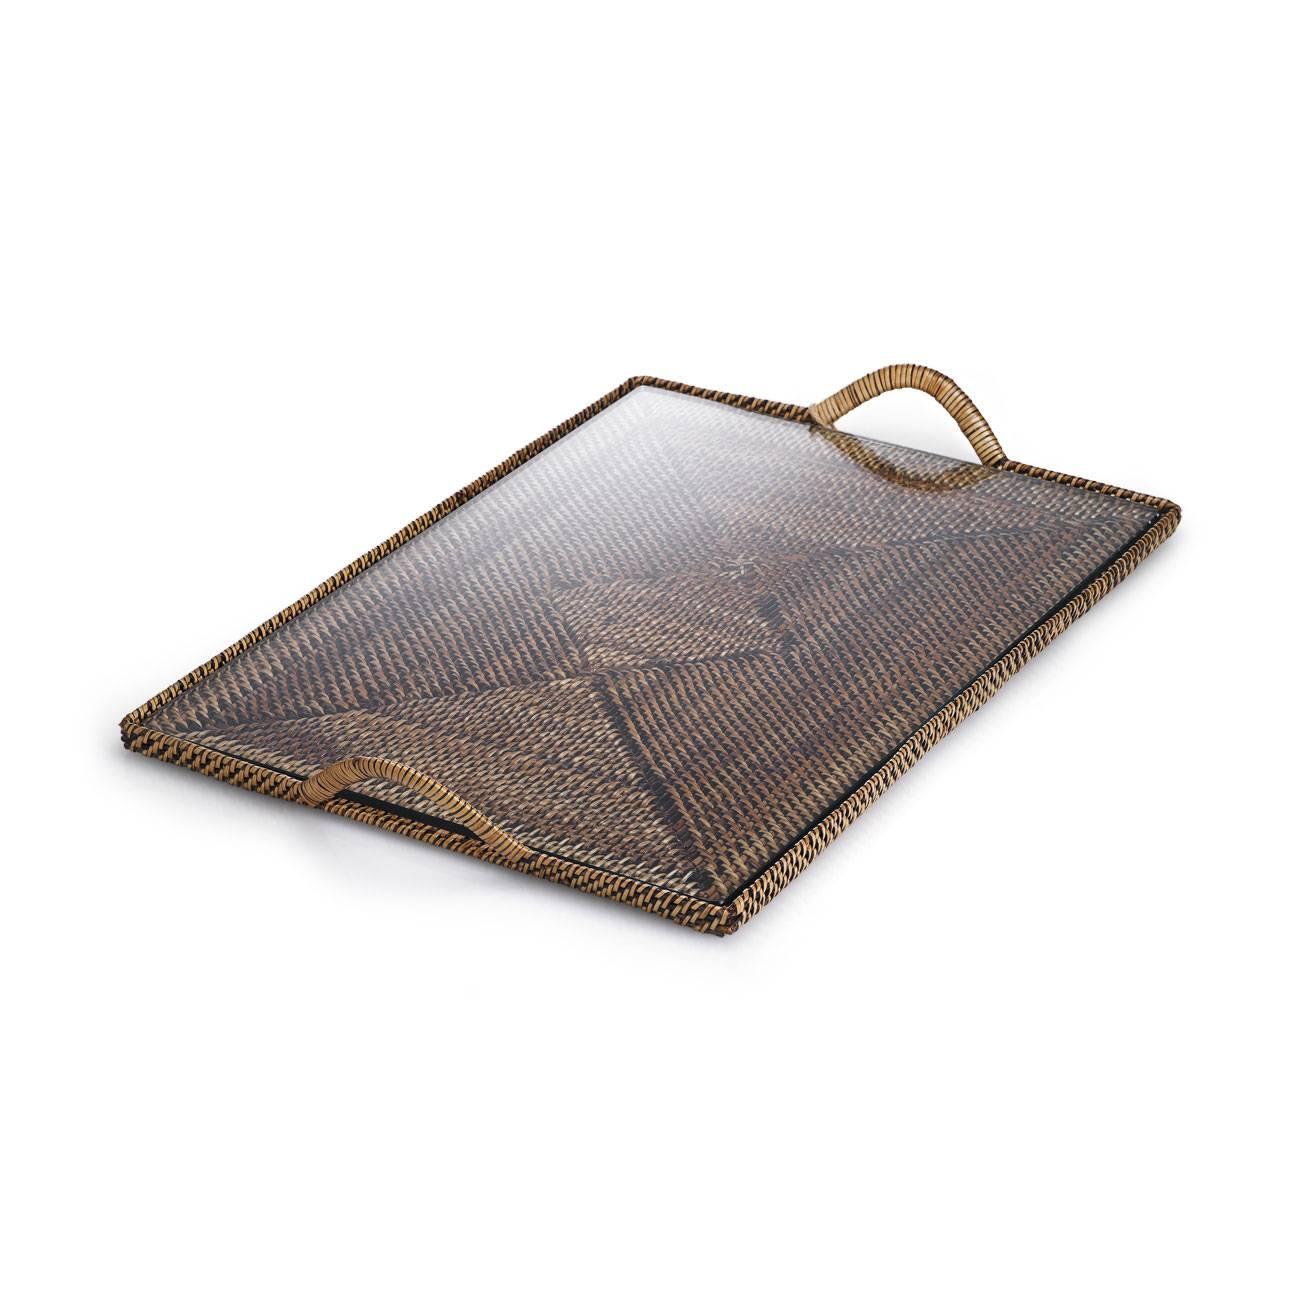 Rectangular Serving Tray with Glass Bottom - Small